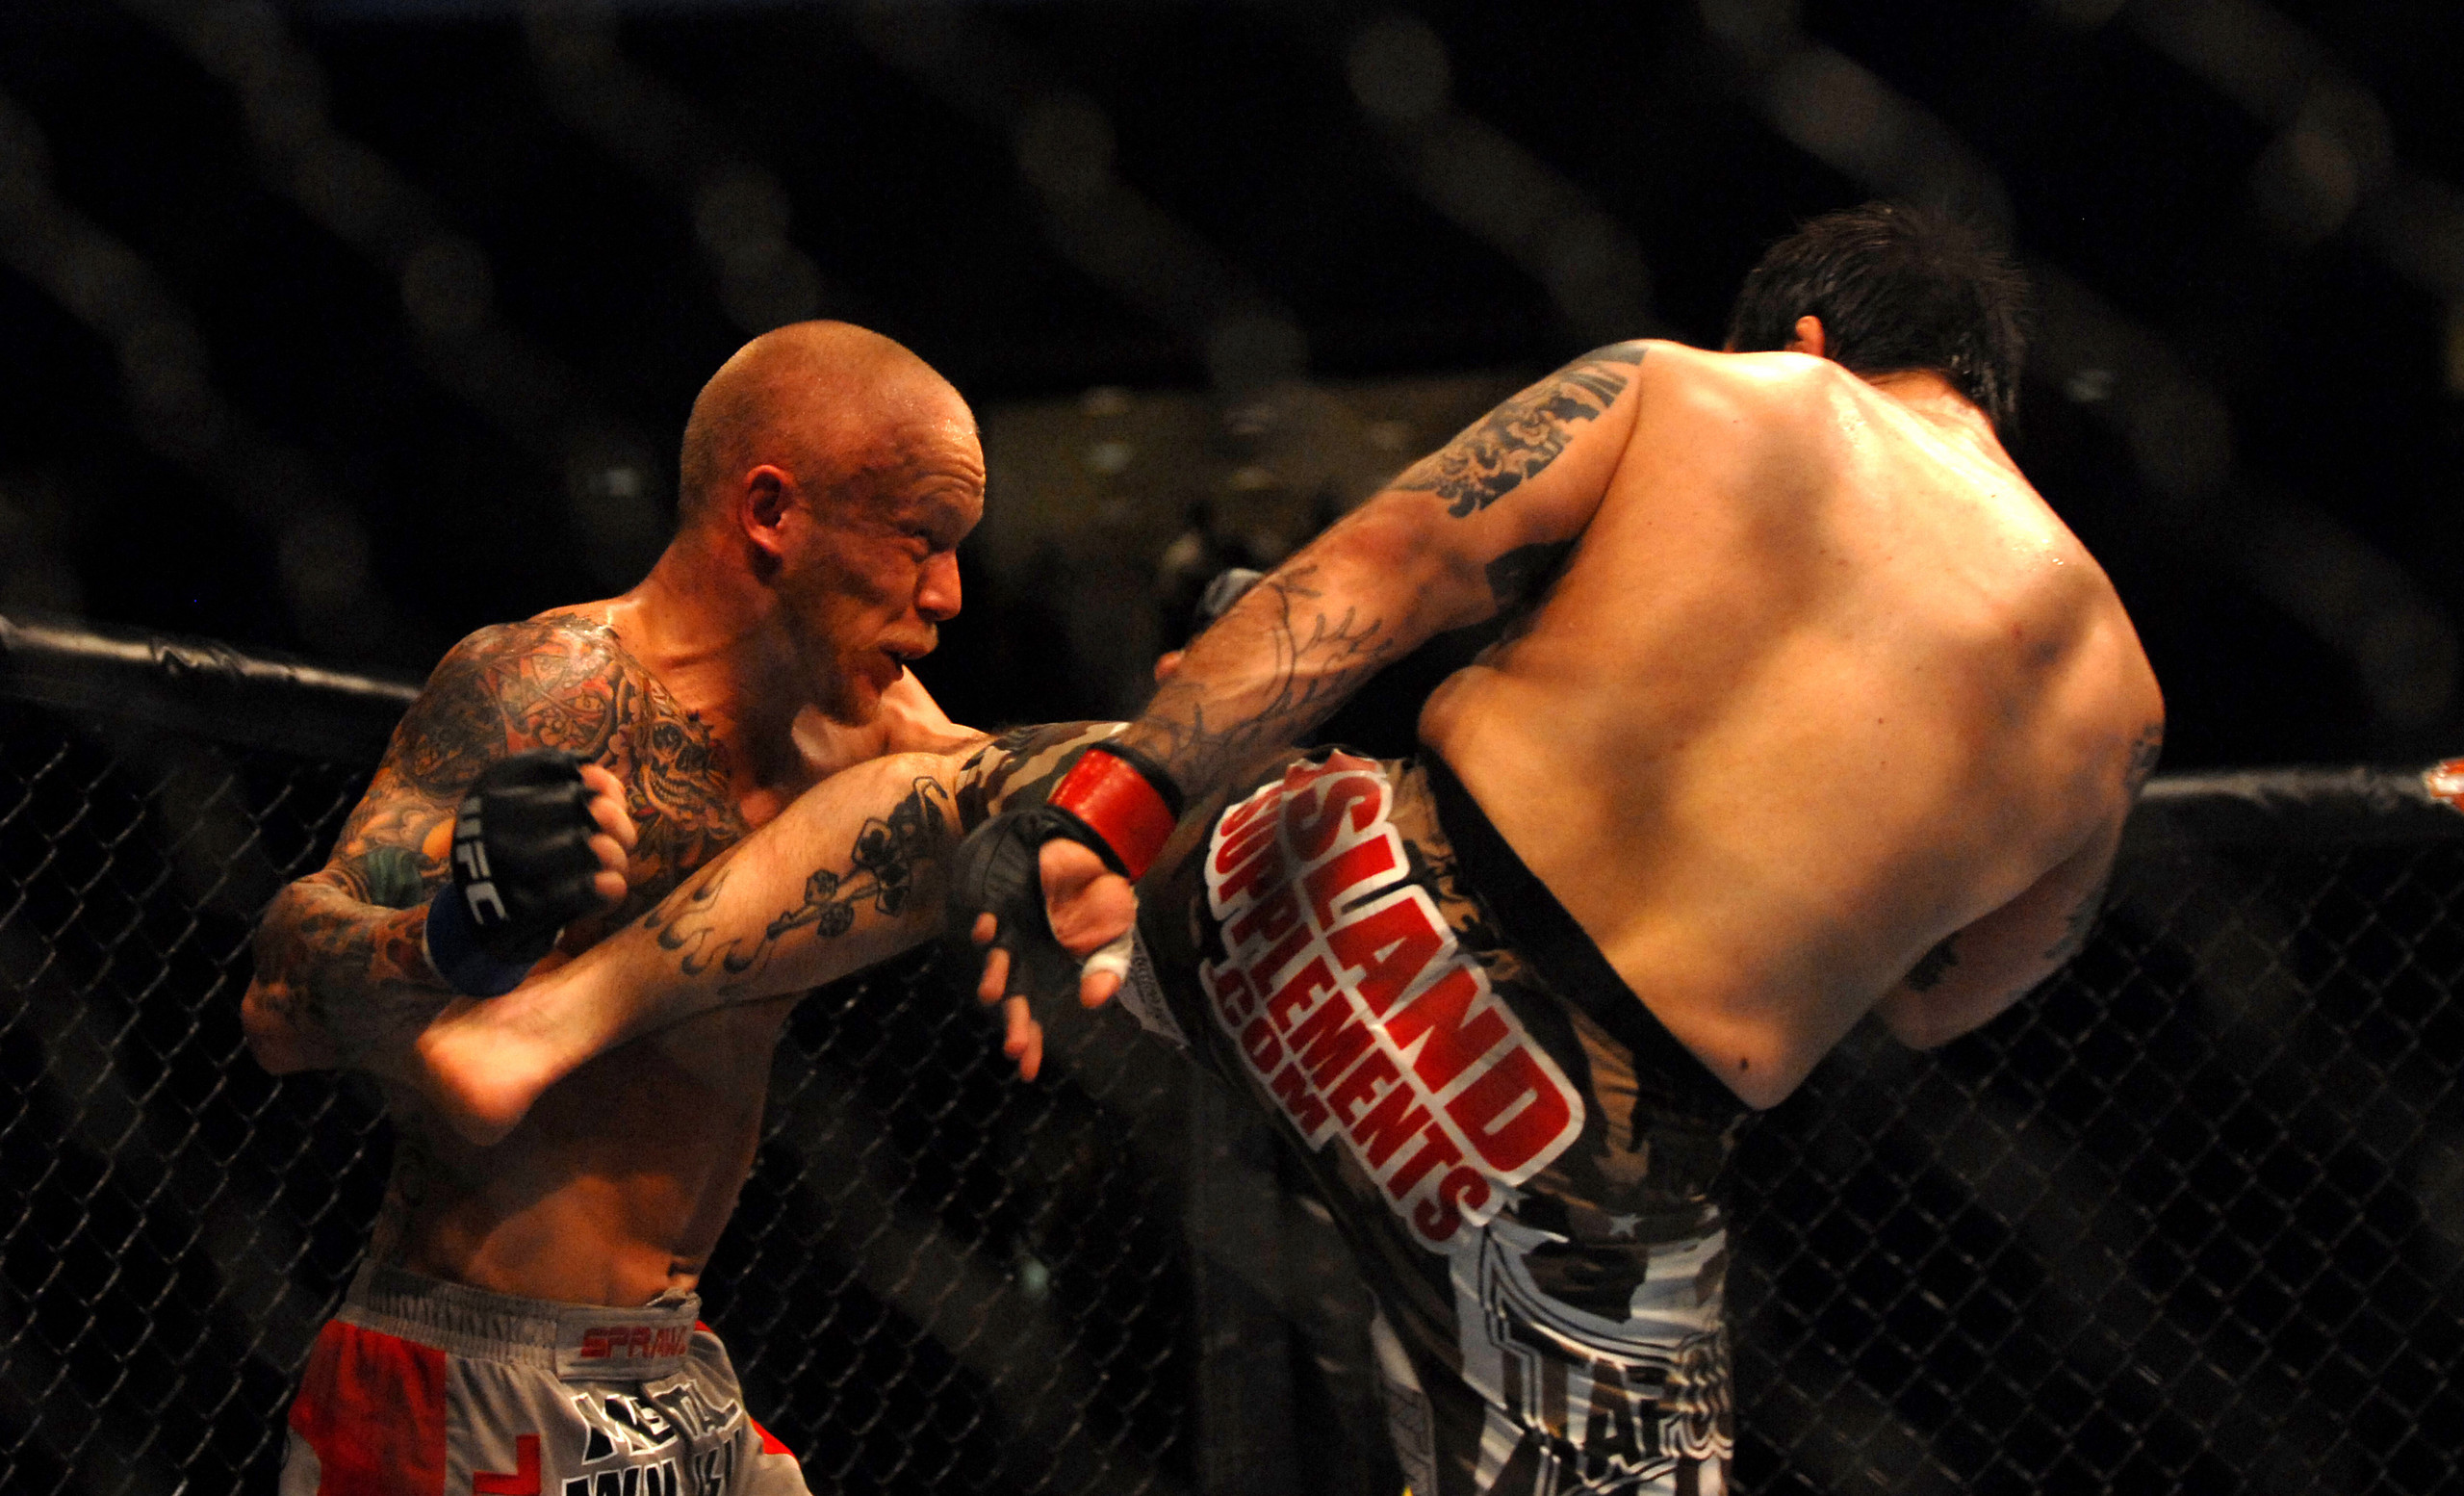 2560x1554 The Ultimate Fighter images UFC at Ft. Bragg HD wallpaper and background  photos